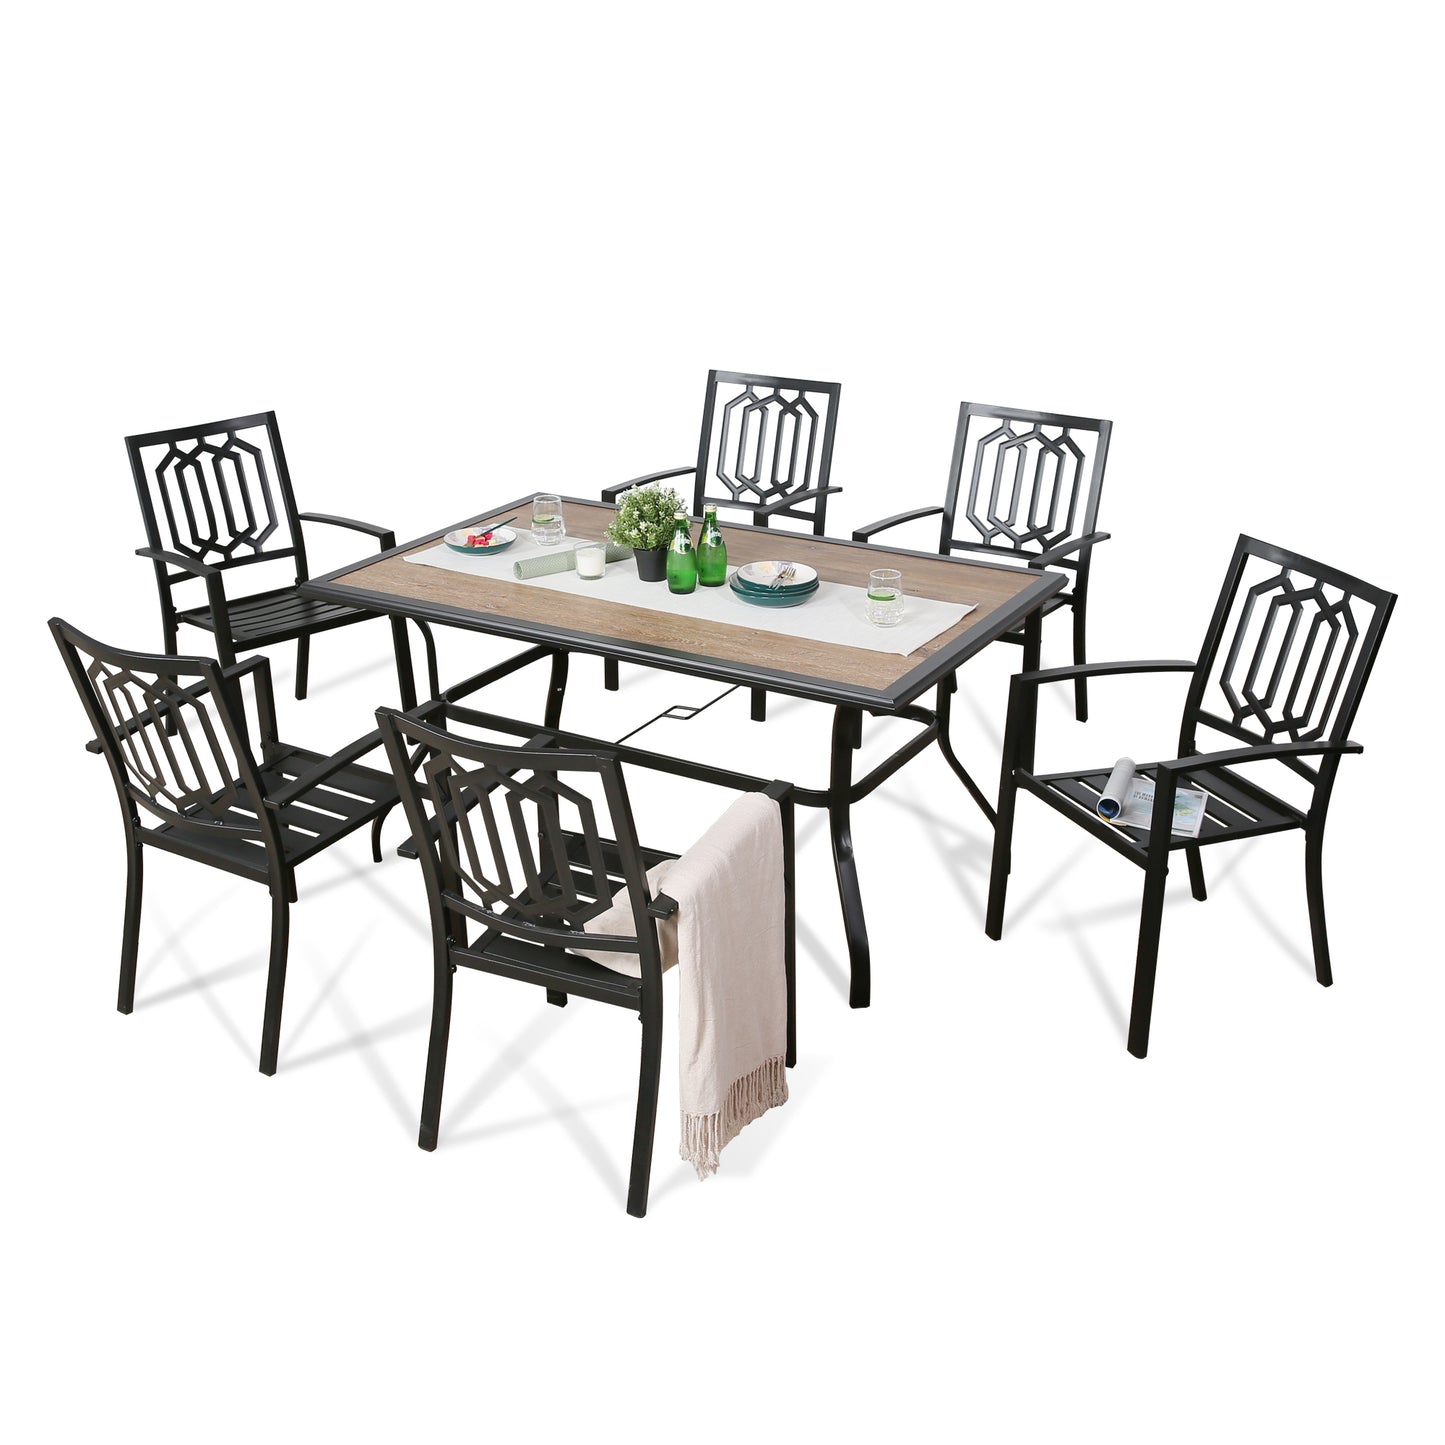 7 Piece Outdoor Dining Set Patio Furniture Dining Table Set with 6 Metal Dining Chairs and 1 Rectangular Garden Dining Table